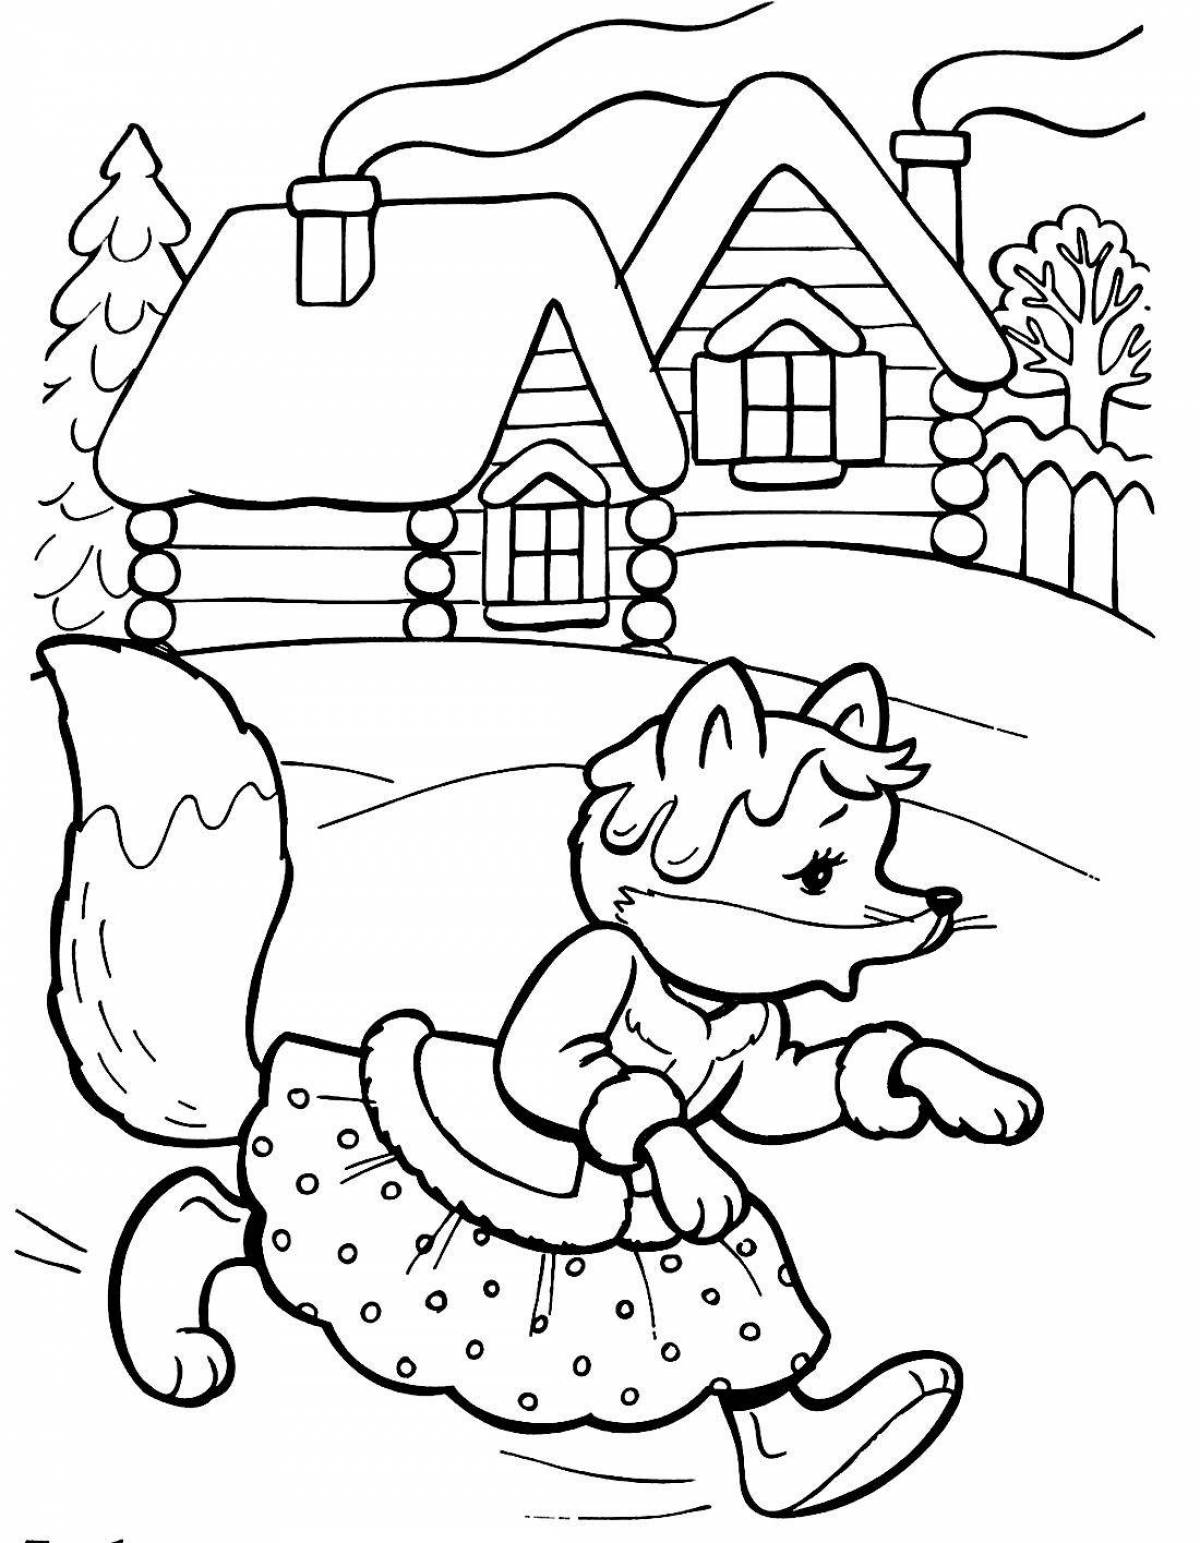 Radiant coloring page fox